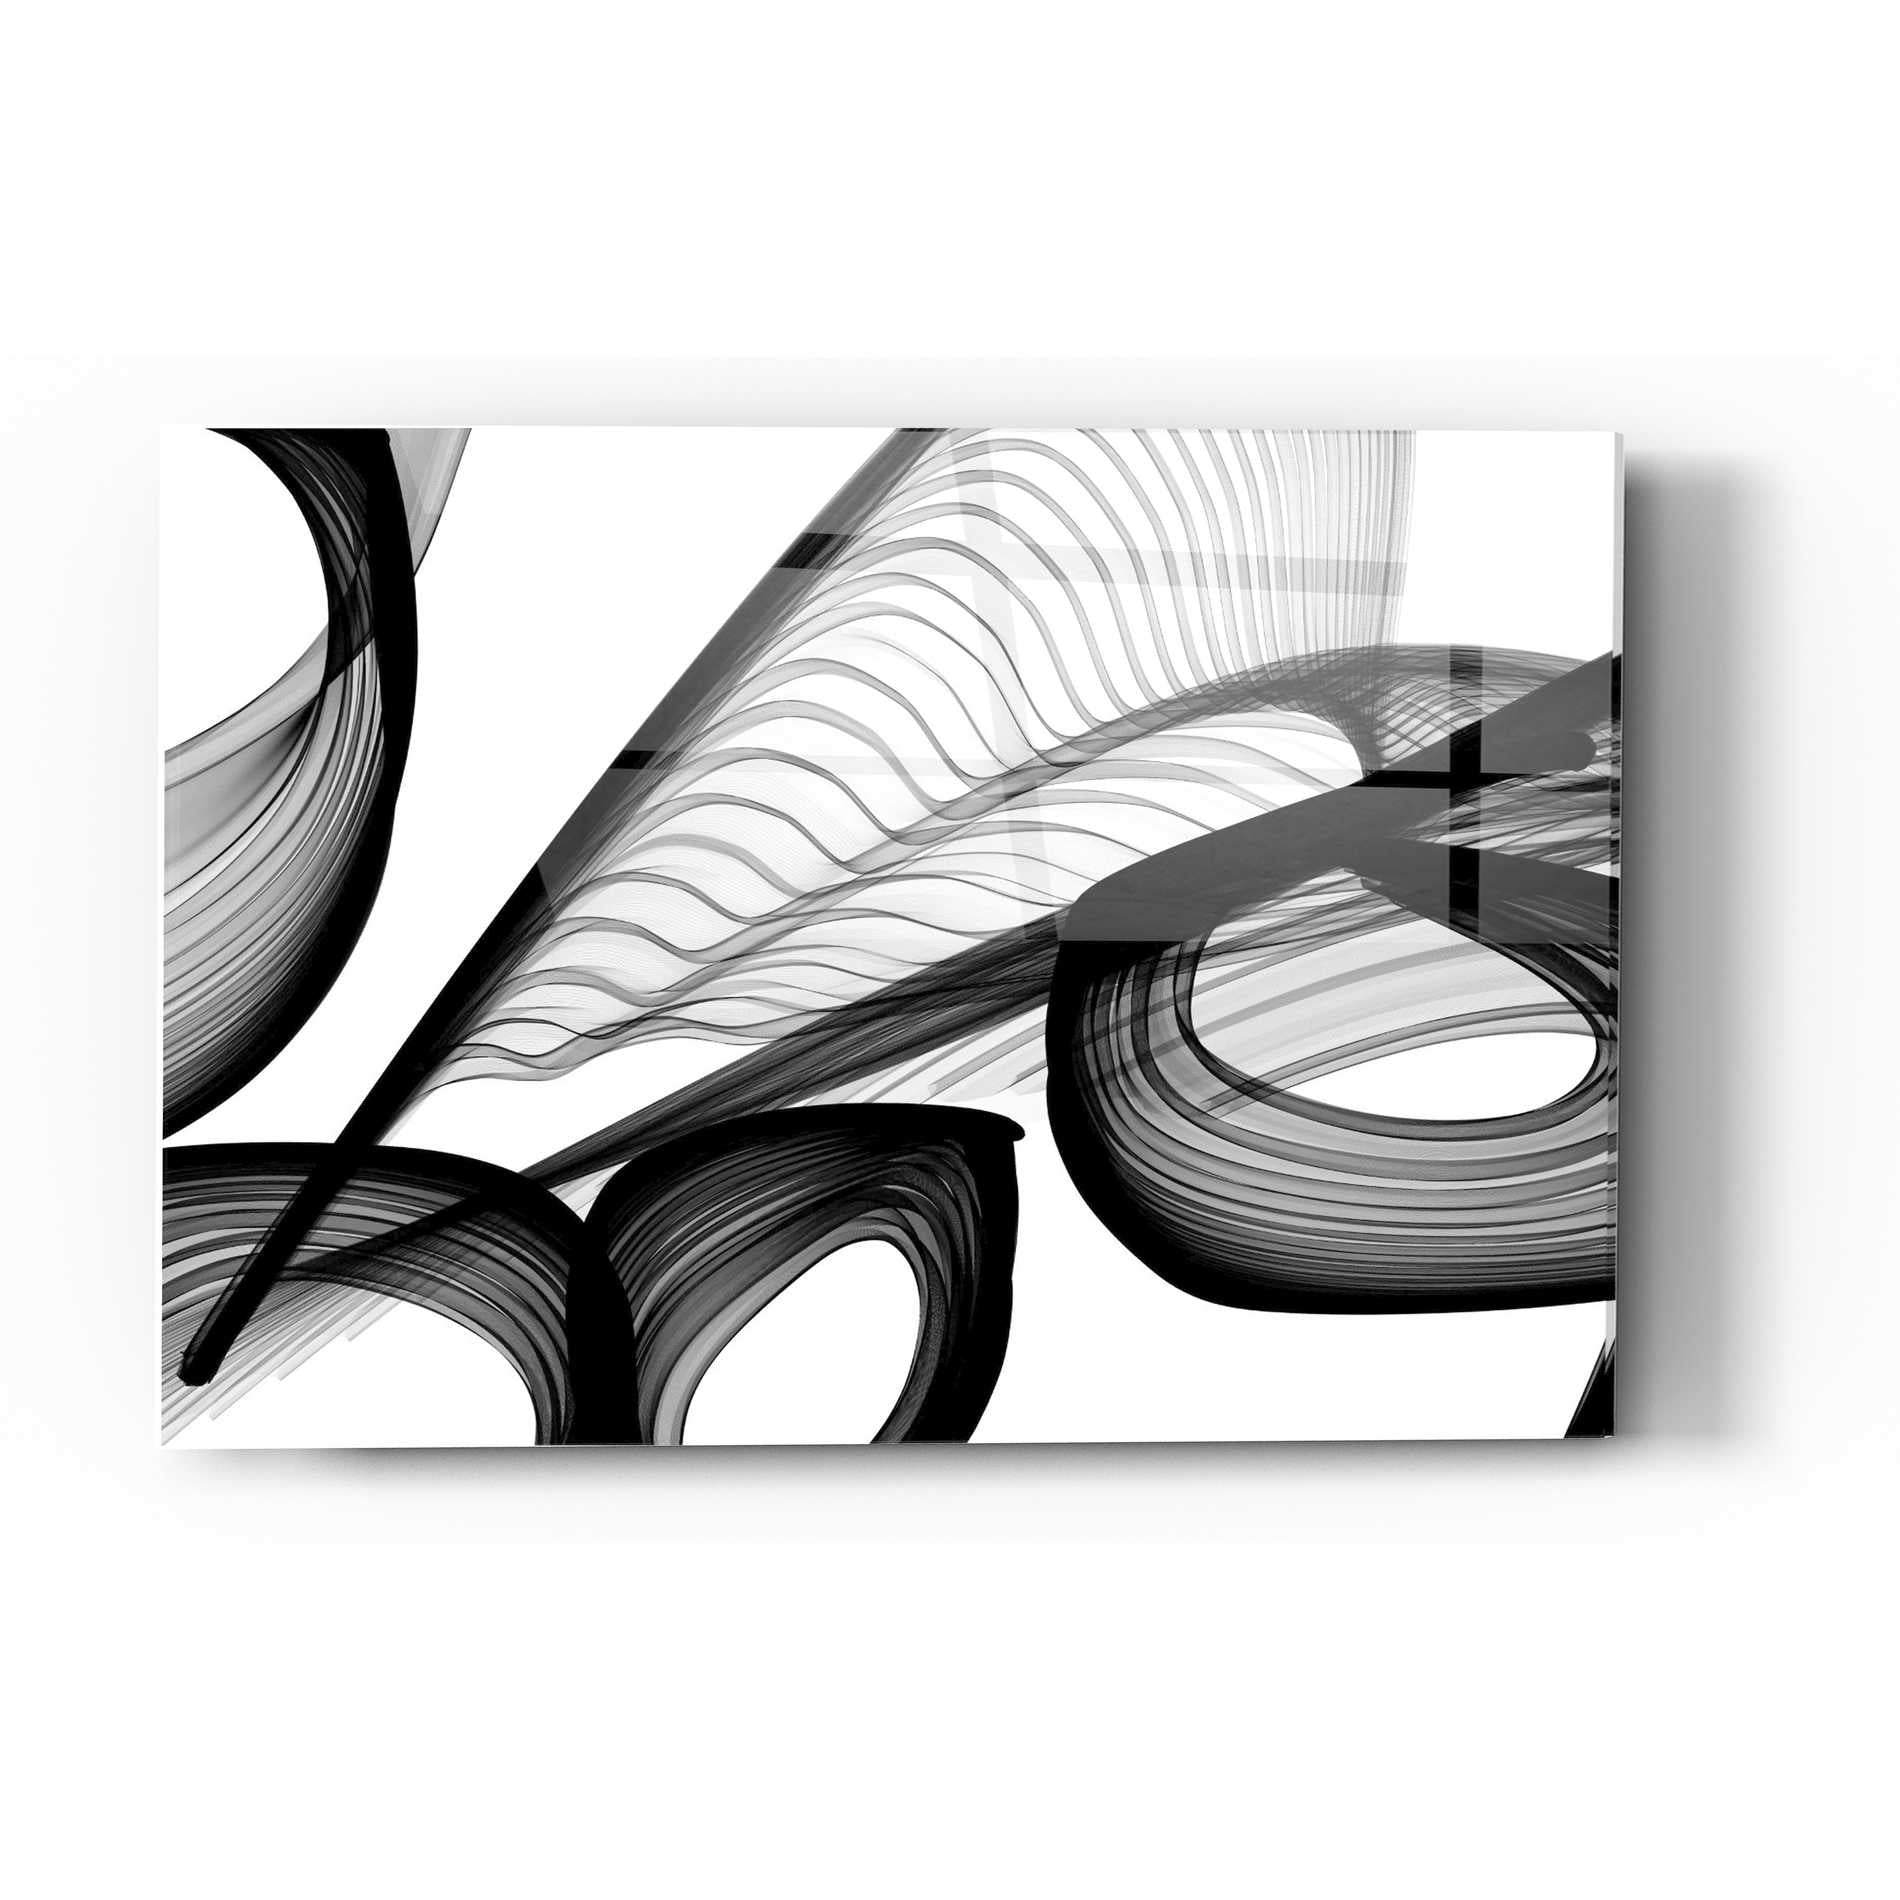 Epic Art 'Abstract Black and White 22-21' by Irena Orlov, Acrylic Glass Wall Art,24x36